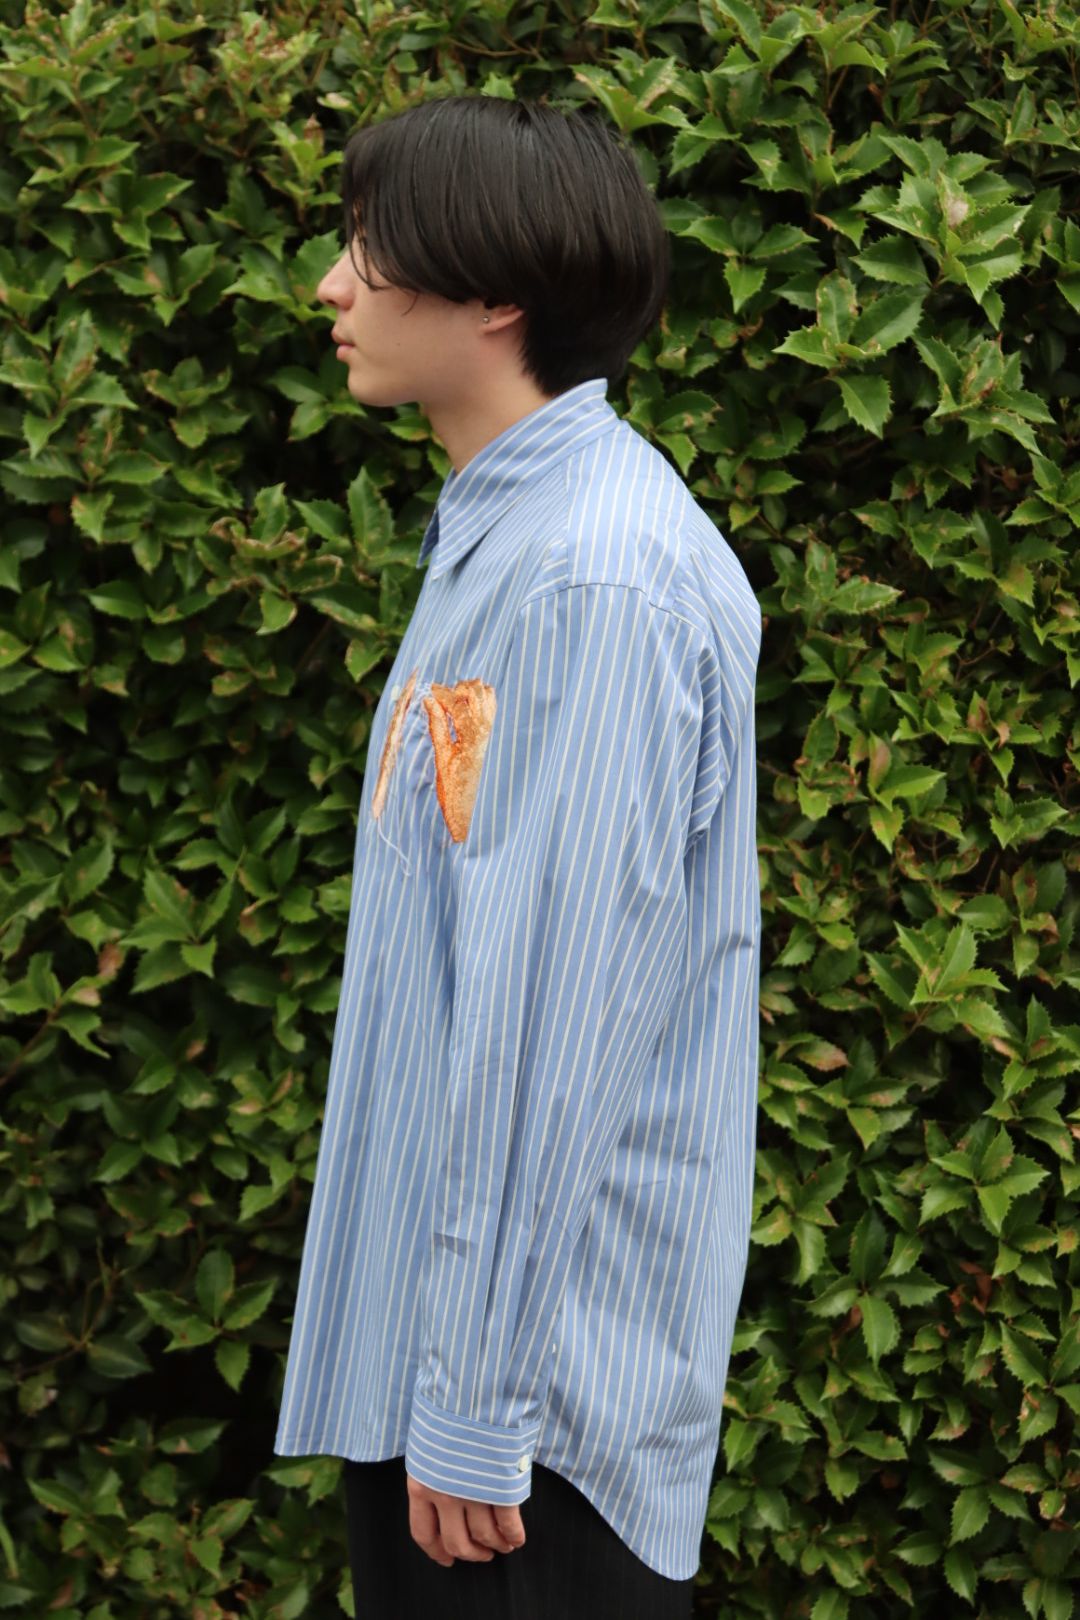 doublet “HAND-EMBROIDERY” PHOTO STITCH SHIRT style.2022.7.24 